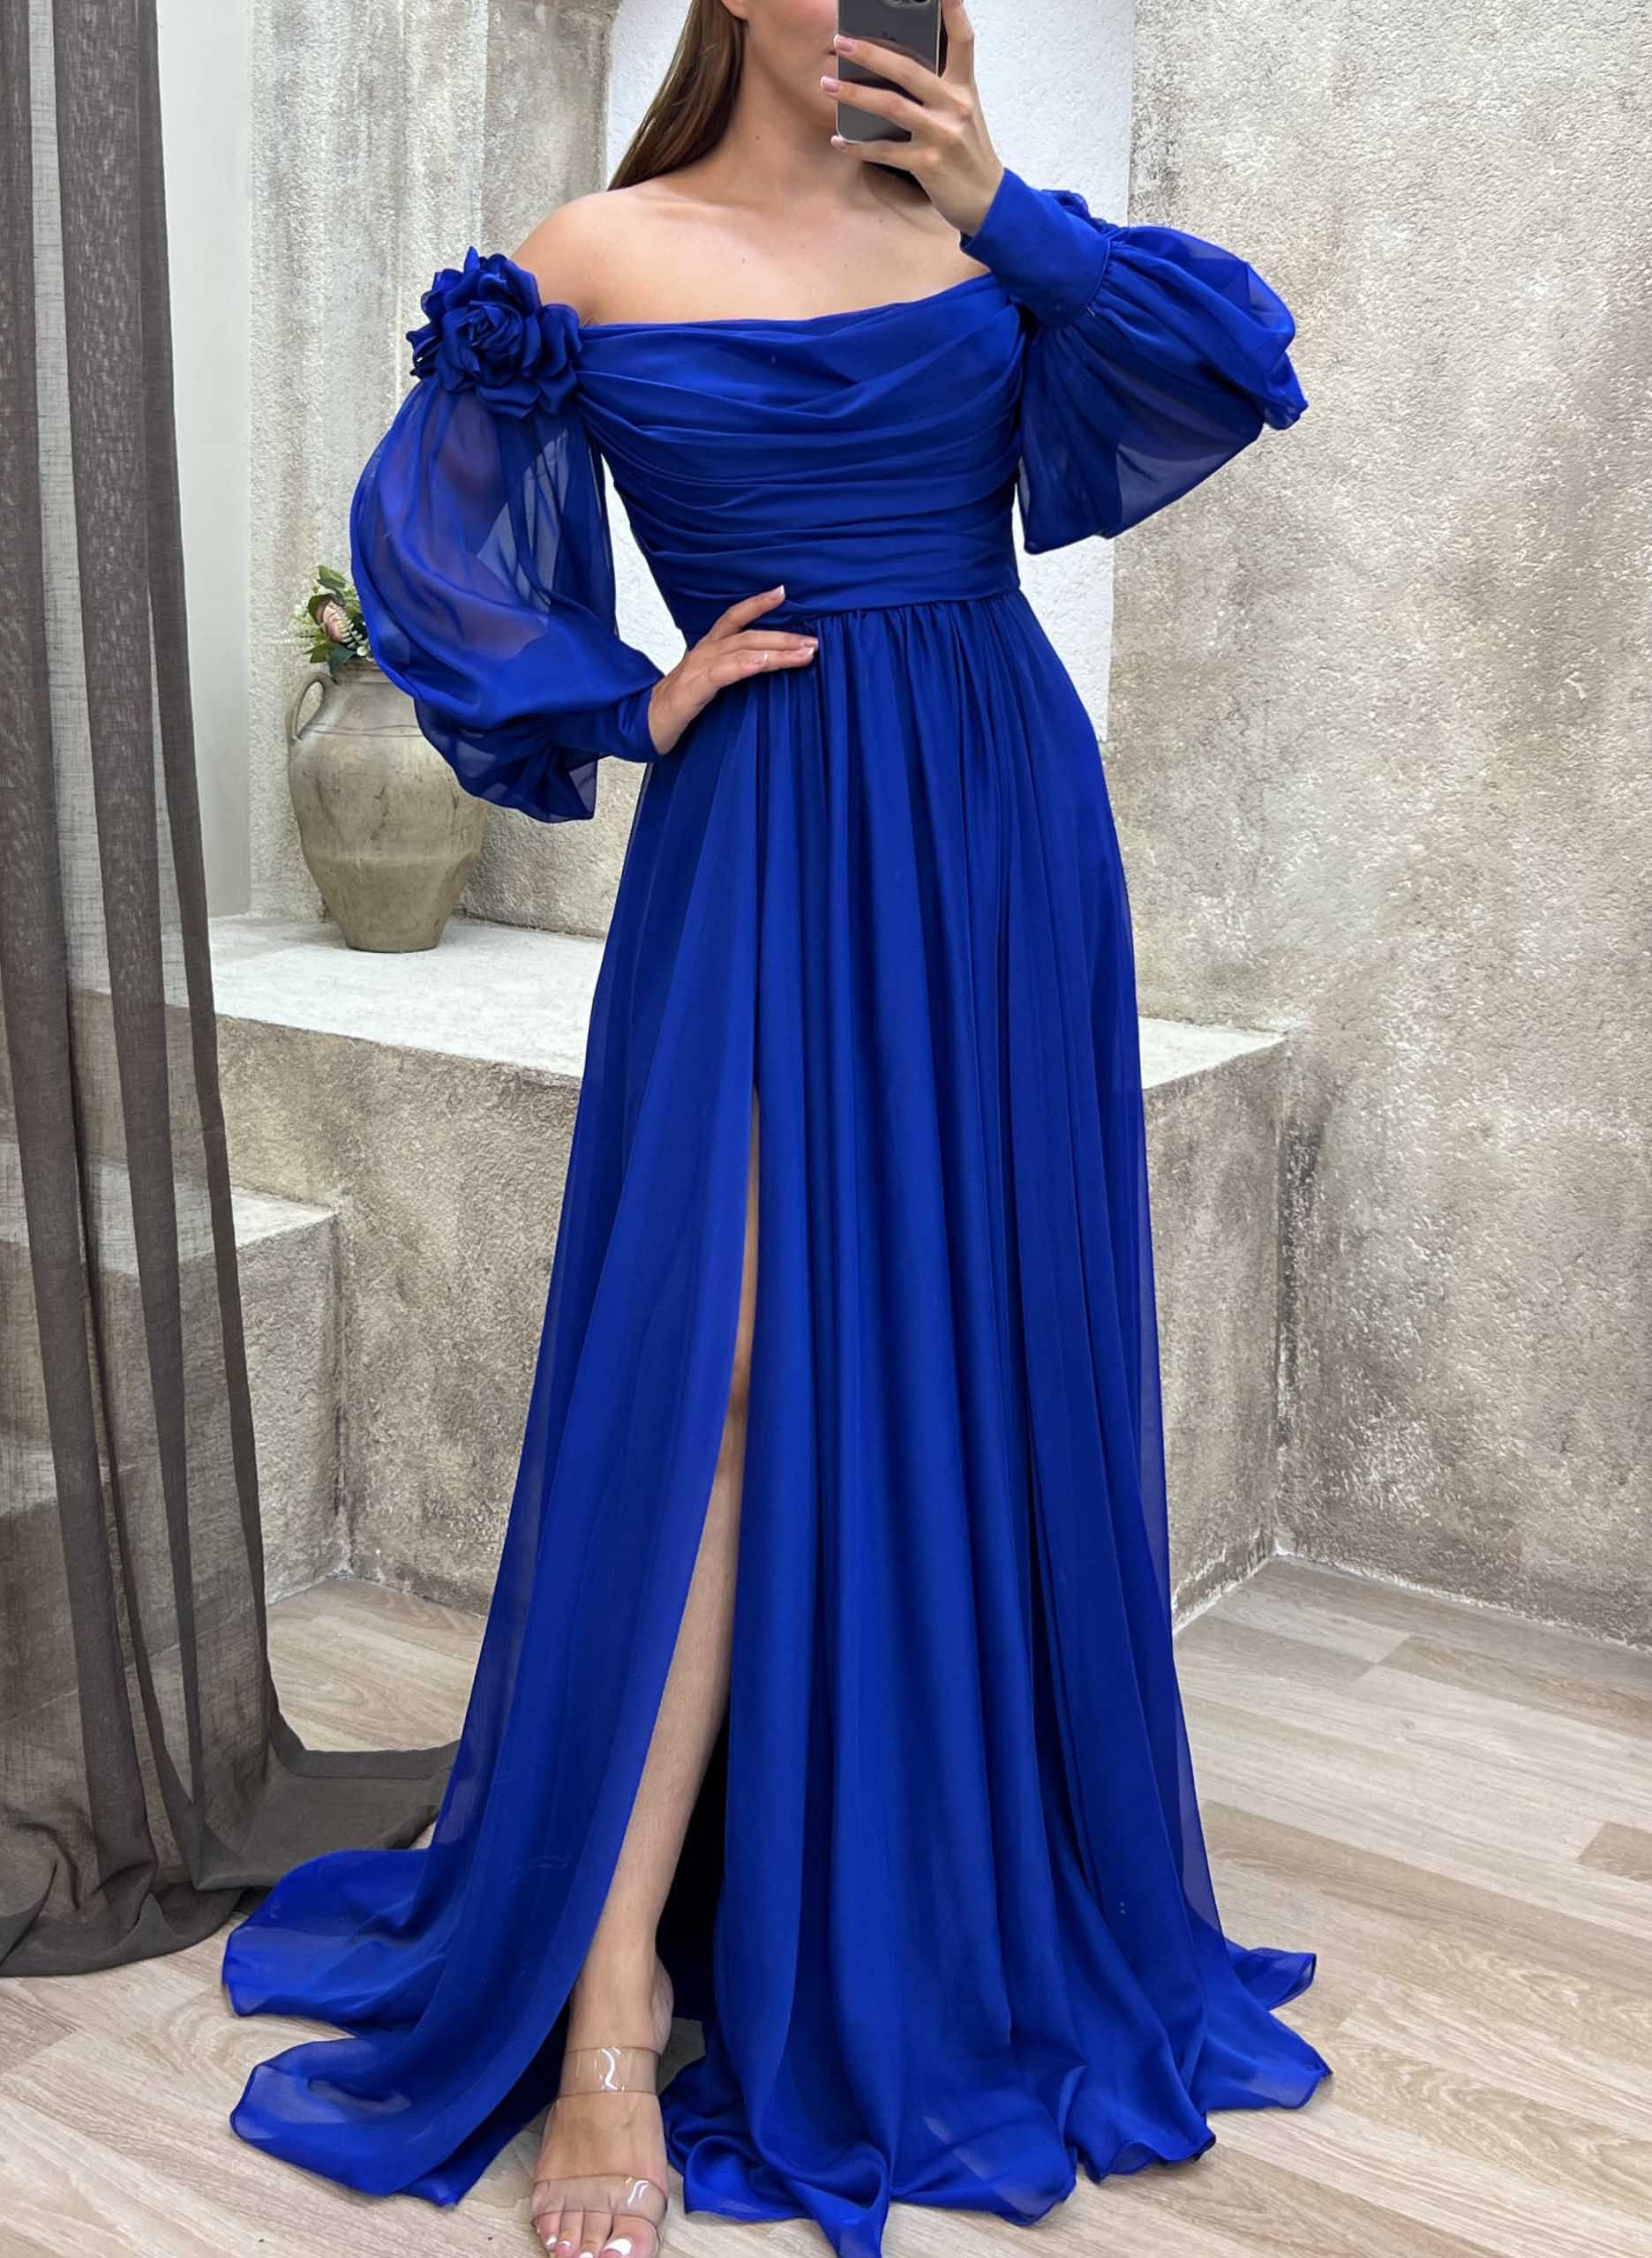 Off-The-Shoulder Long Sleeves Flowers Evening Dresses With Chiffon